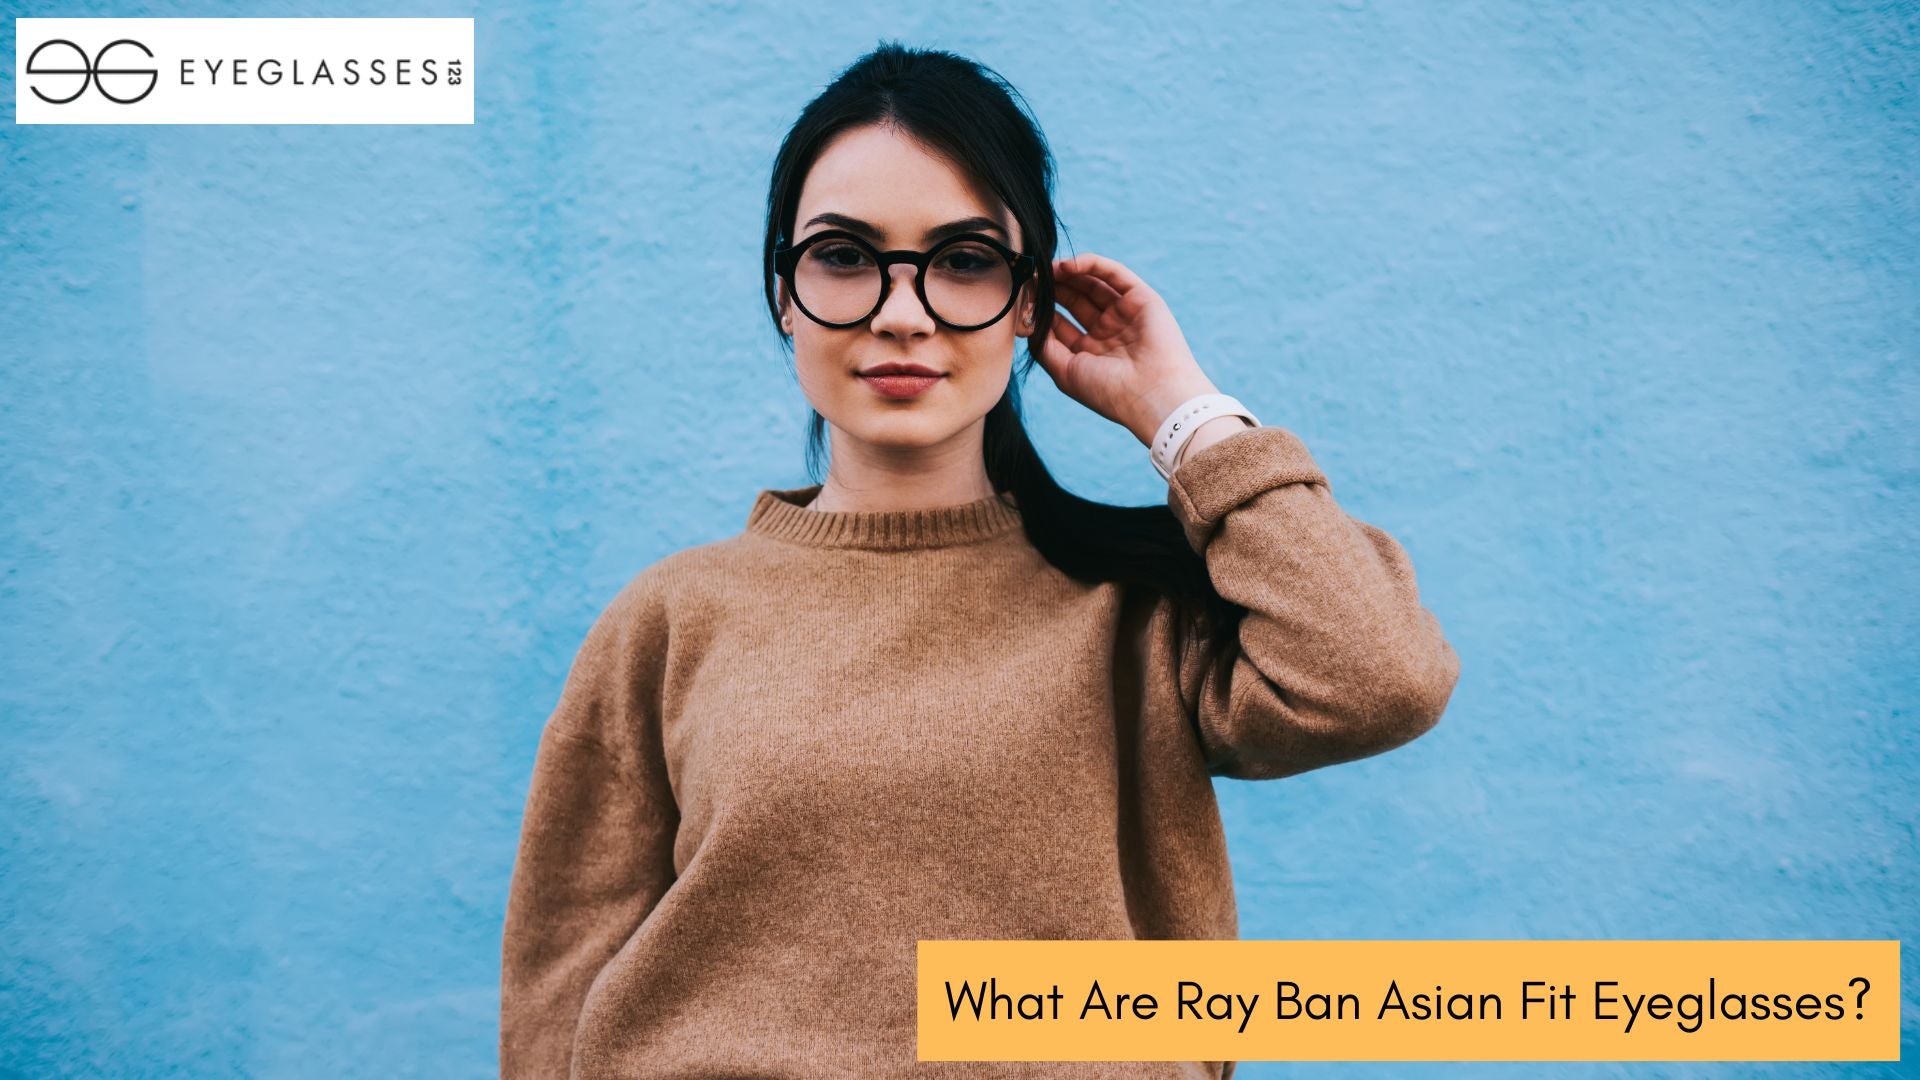 What Are Ray Ban Asian Fit Eyeglasses?